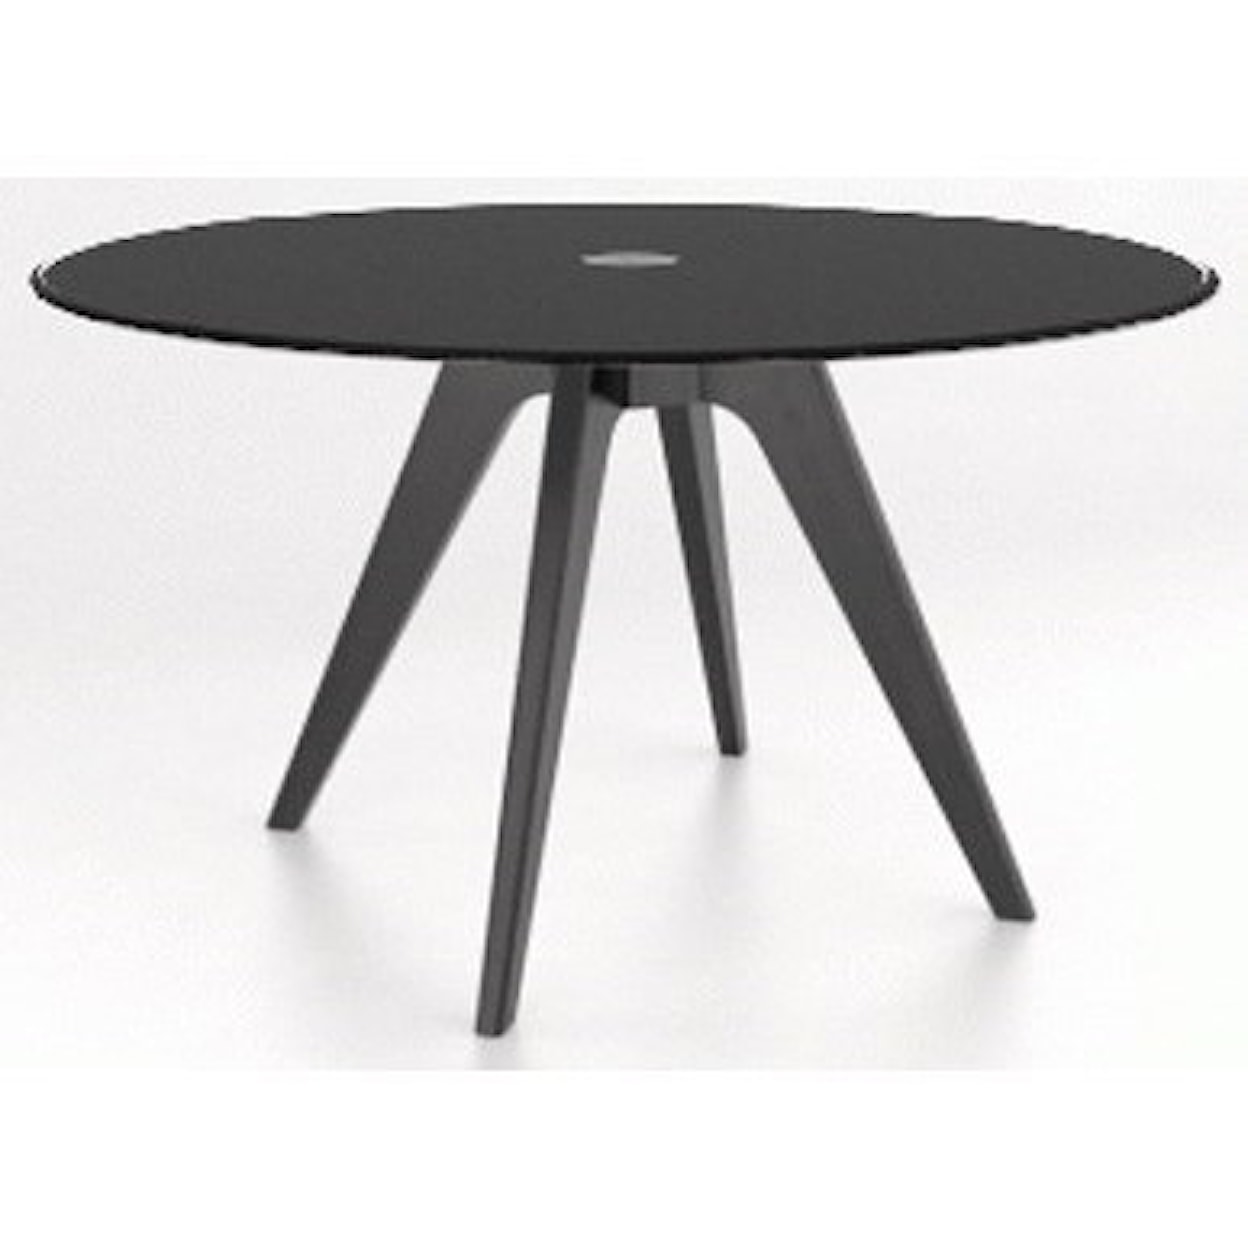 Canadel Downtown - Custom Dining Customizable Dining Table